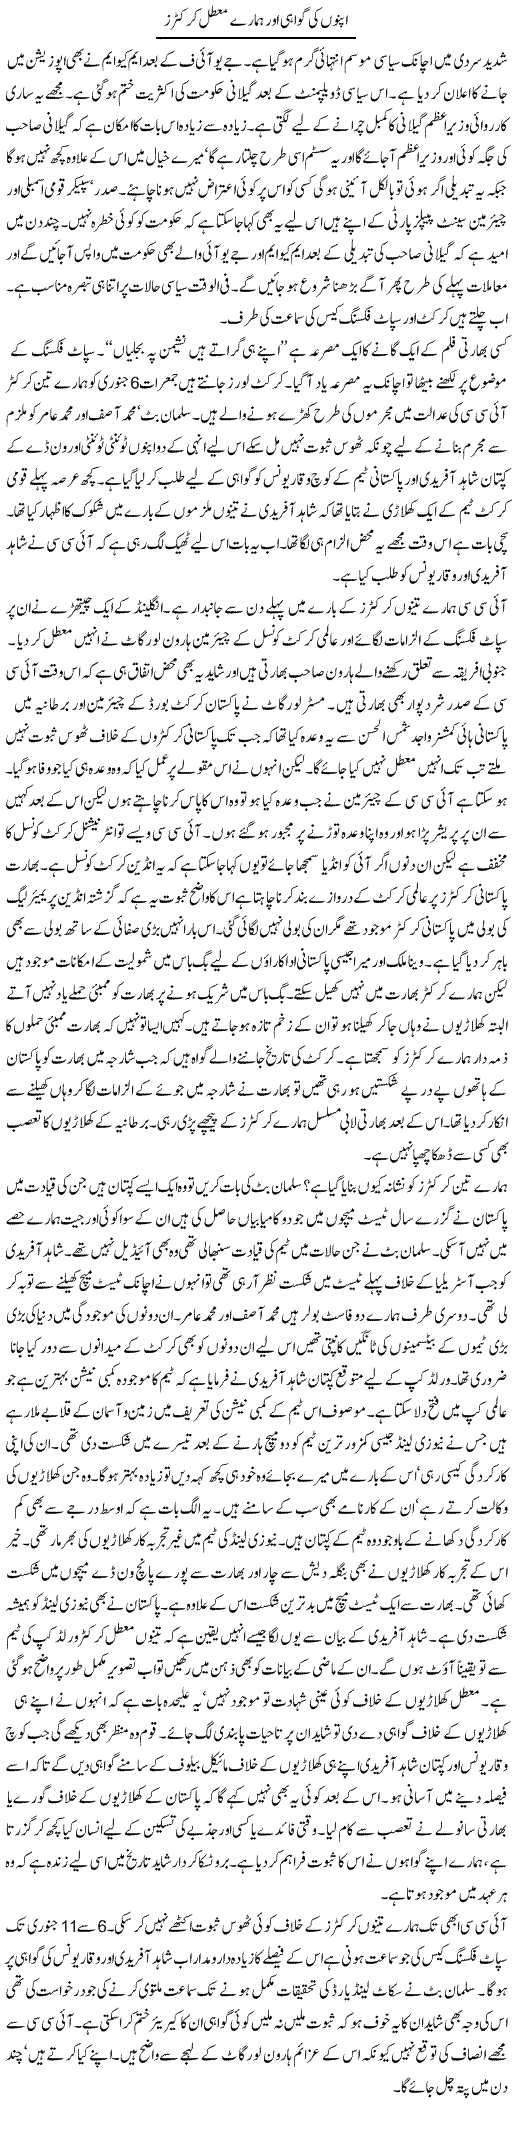 Suspended Cricketers Express Column Iyaz Khan 4 January 2011